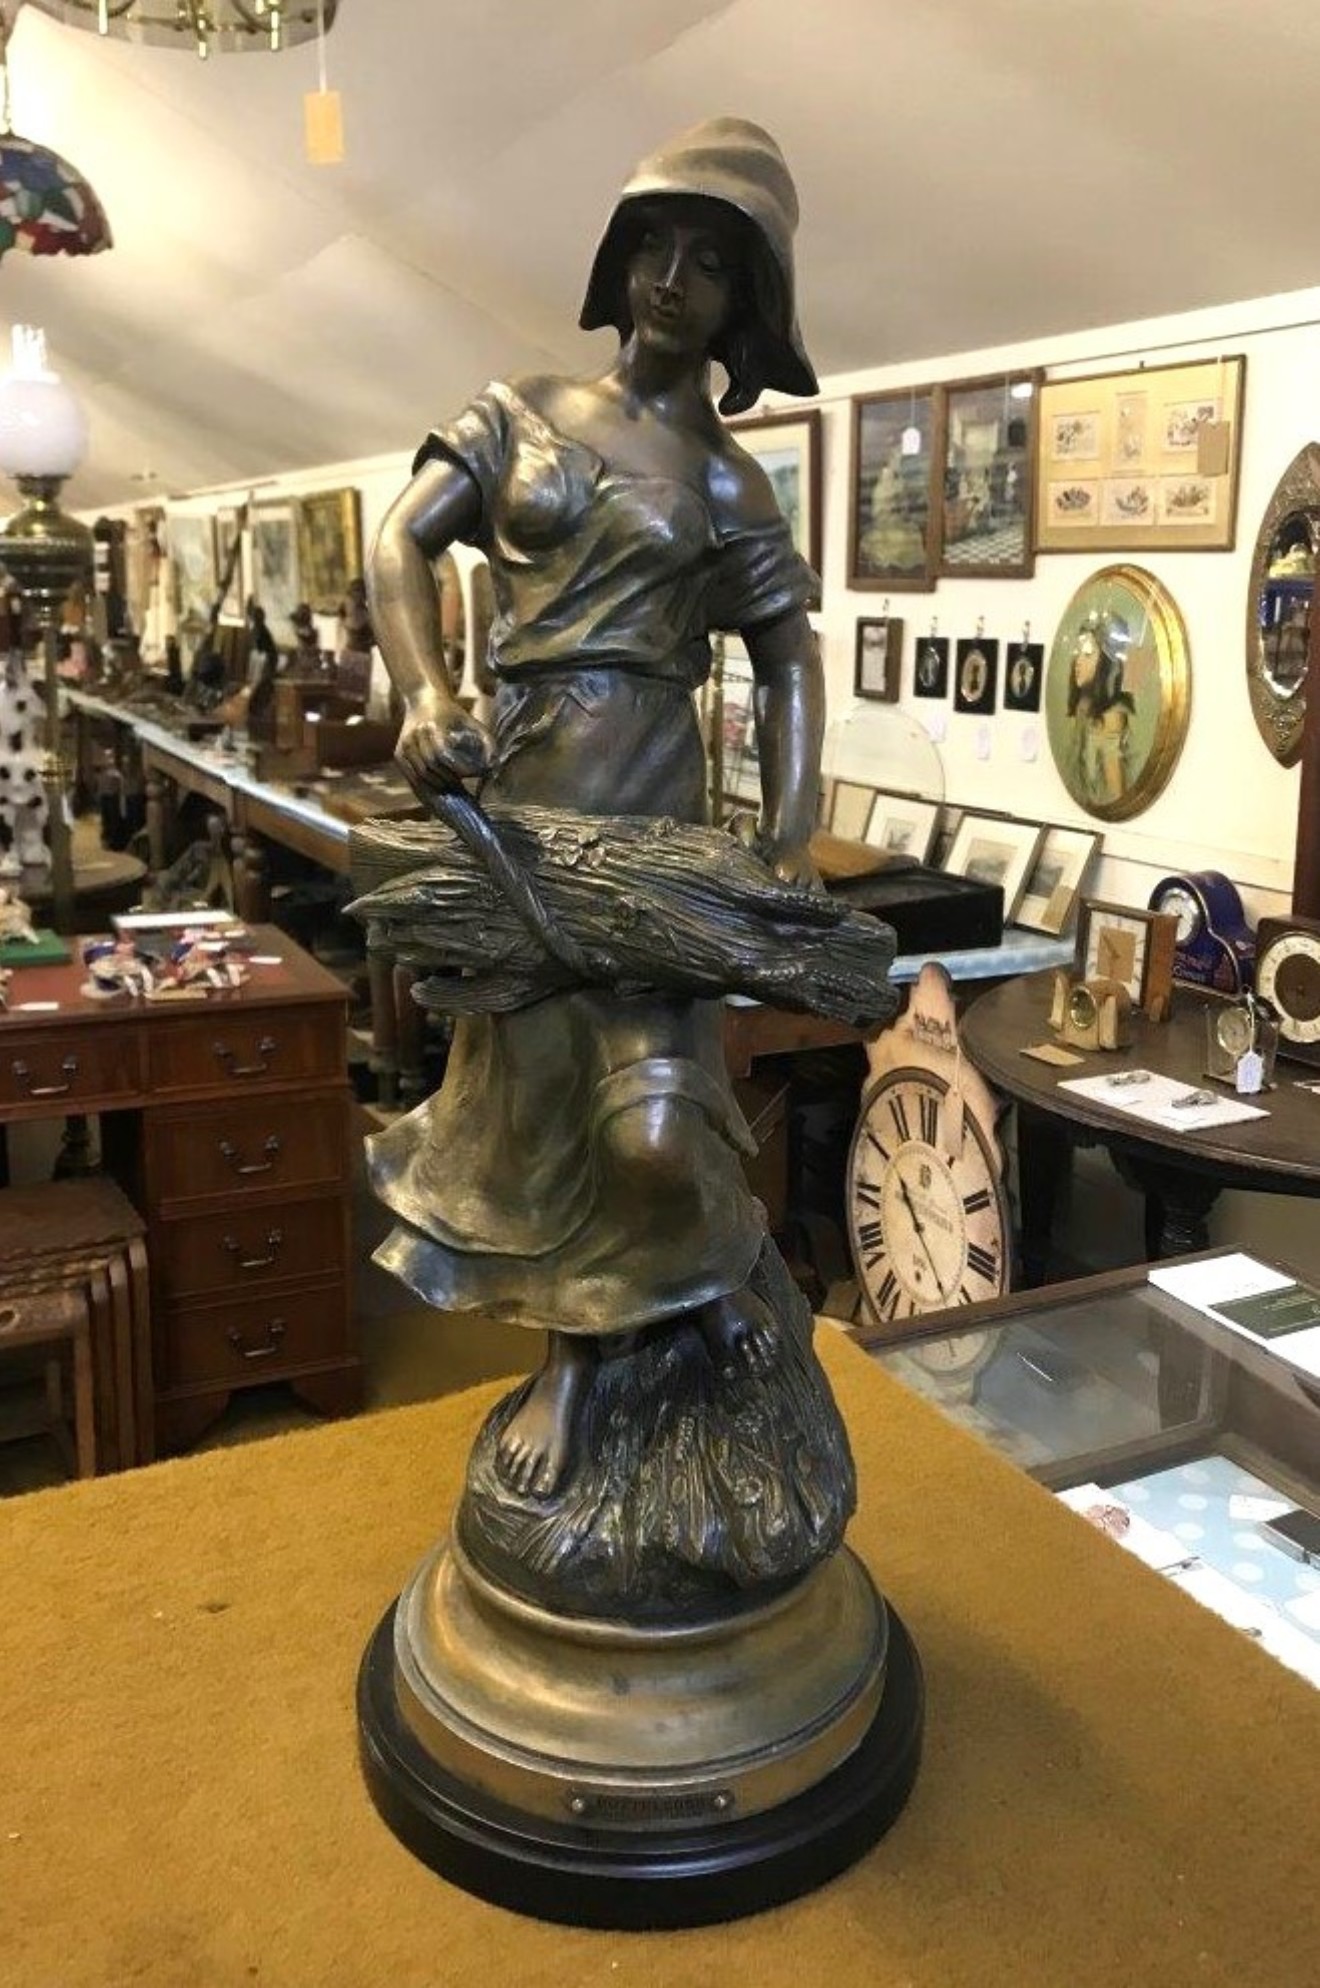 Antique Pair of French Bronzed Spelter Figures 'Semeur' and 'Botteleuse' (Sower and Baler) After Emile Rousseau (Sculptor)